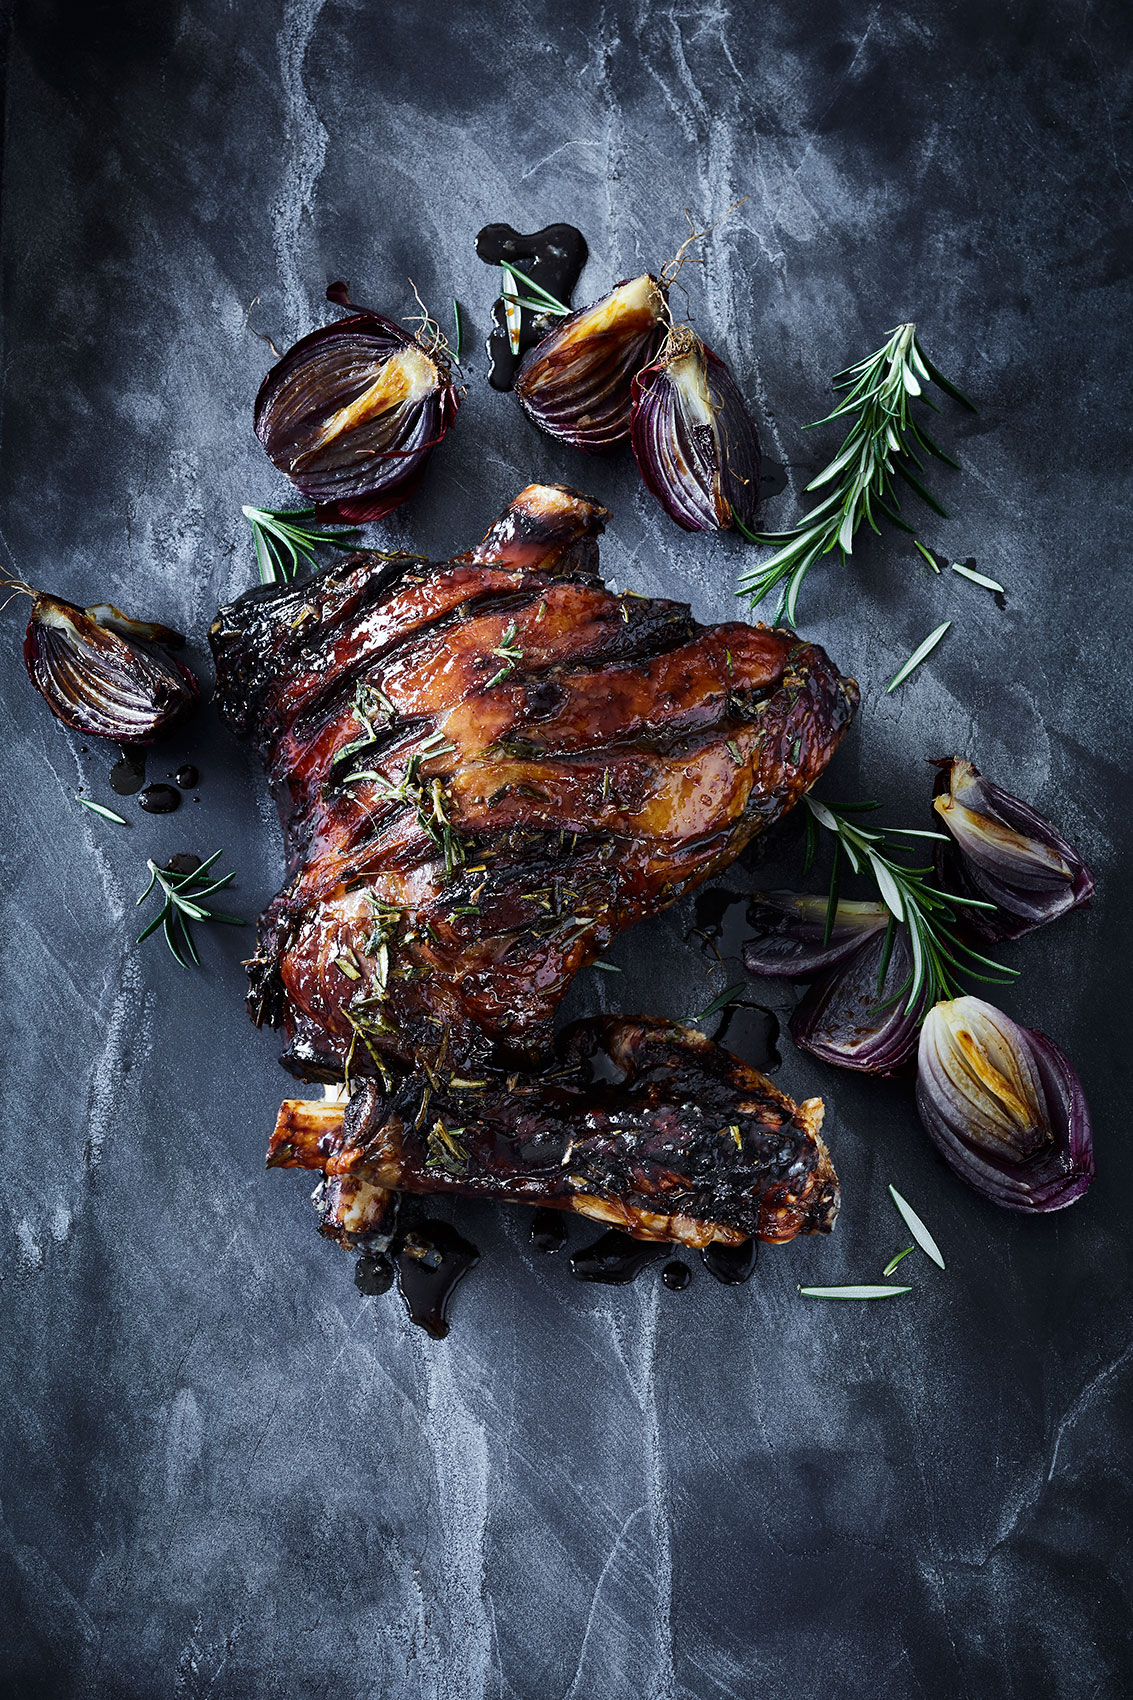 Honey Lamb Leg with Rosemary on Textured Bench • Advertising & Editorial Food Photography